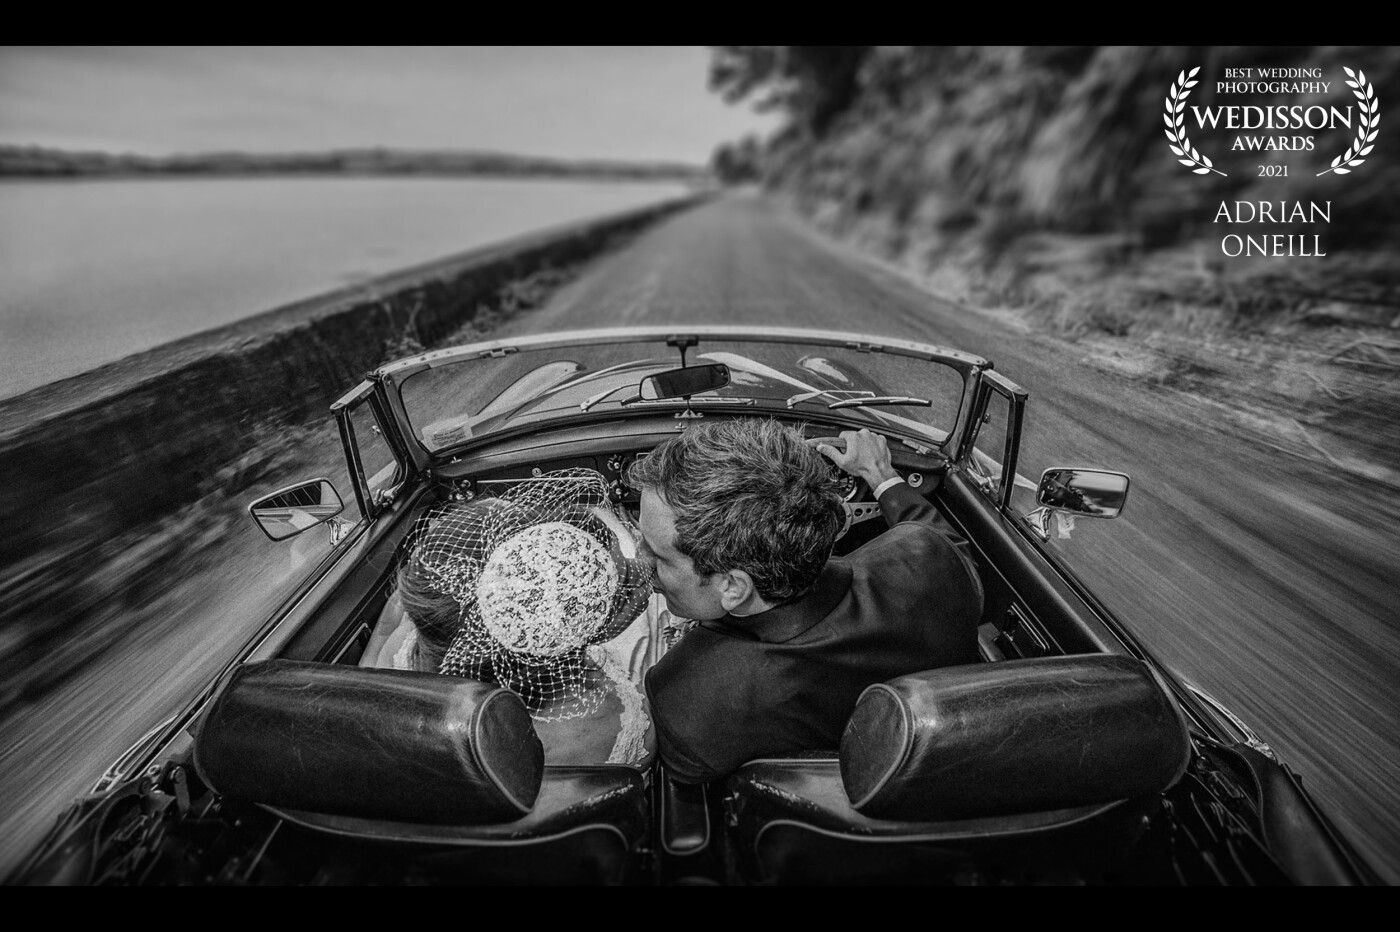 When the couple told me they have a convertible!!!!! Nearly broke my neck getting this shot!!!!! but it was worth it..I always try to get that different perspective 